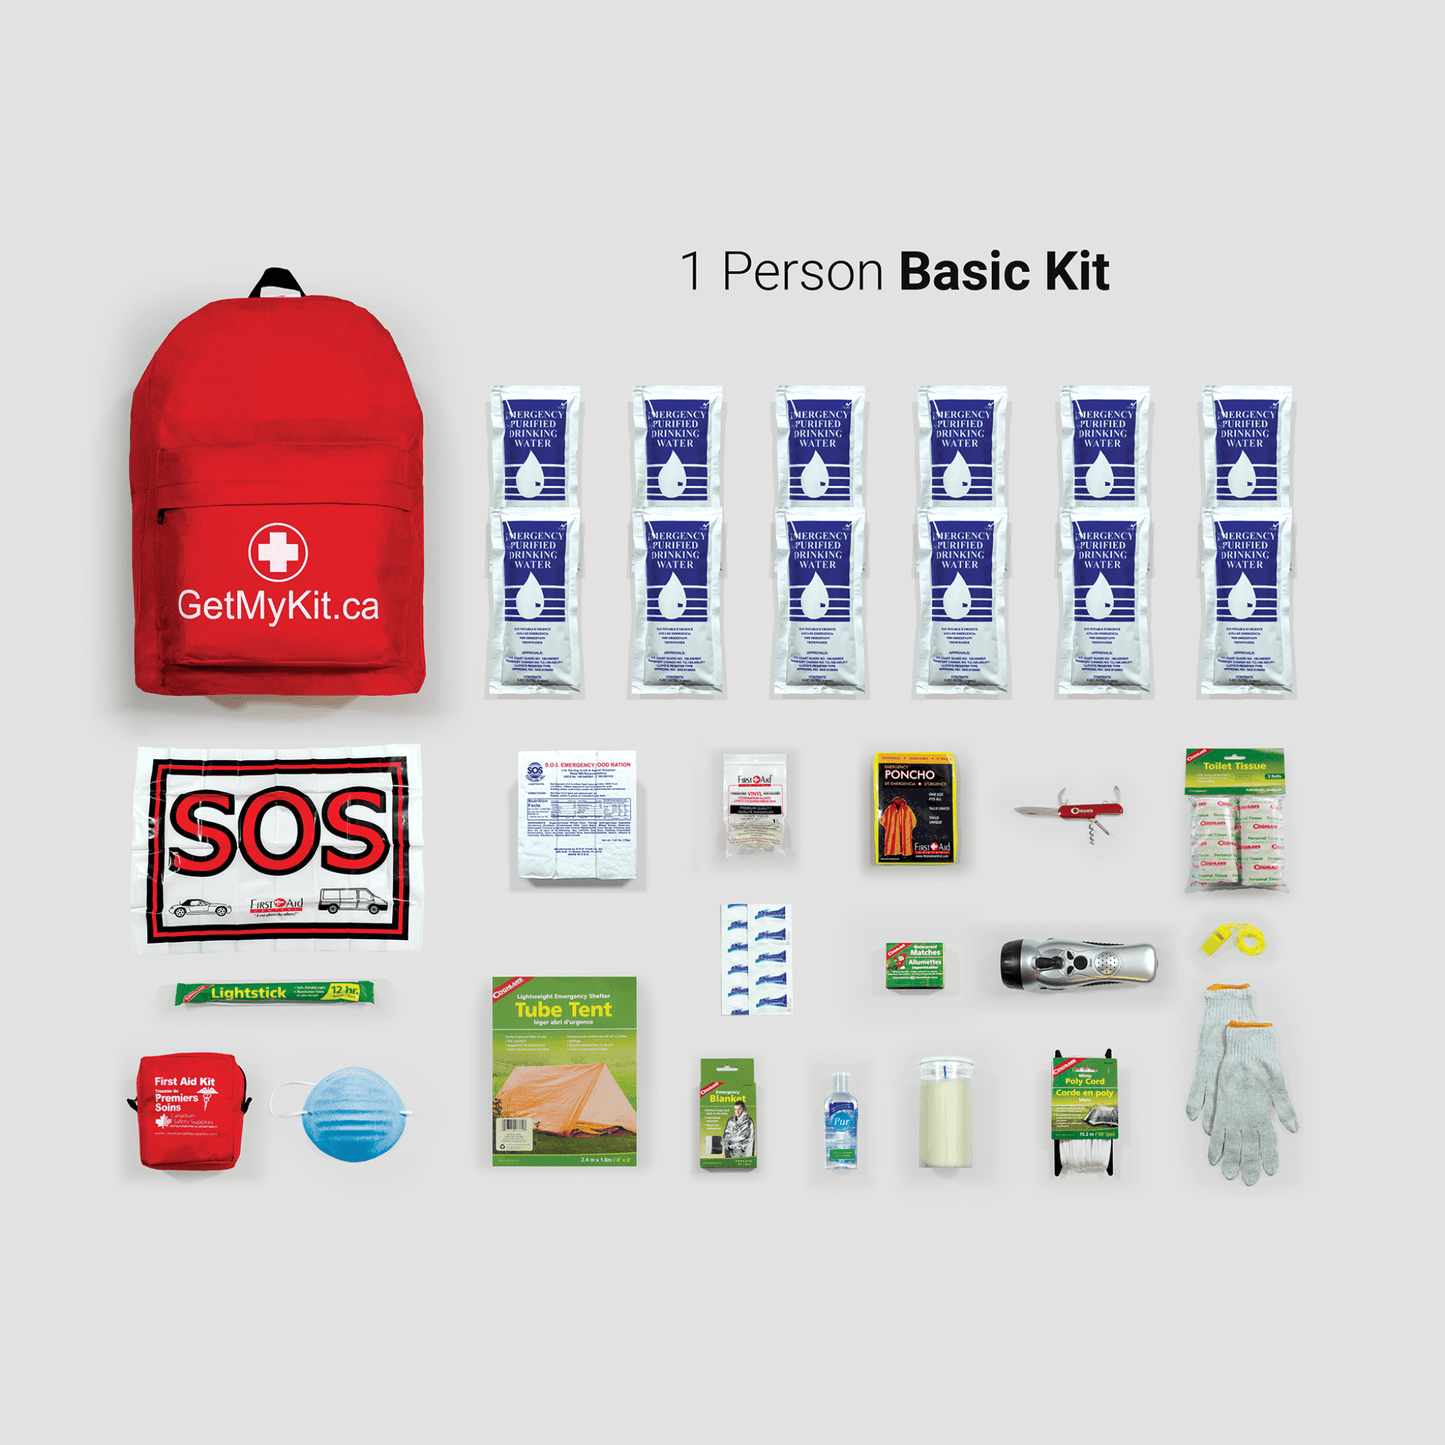 A one person basic emergency kit and its contents.